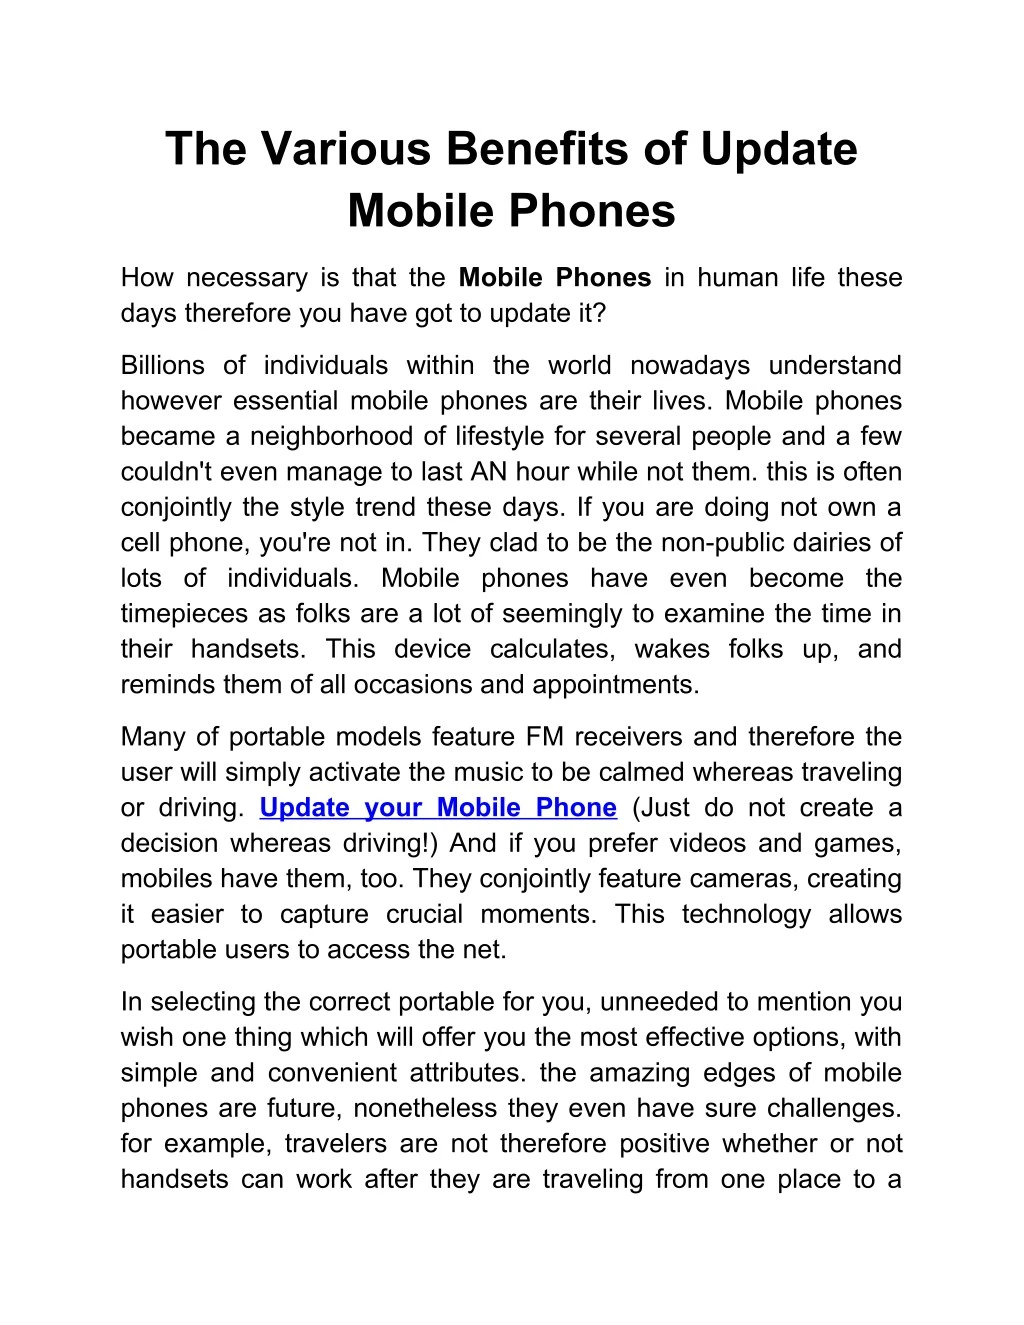 the various benefits of update mobile phones